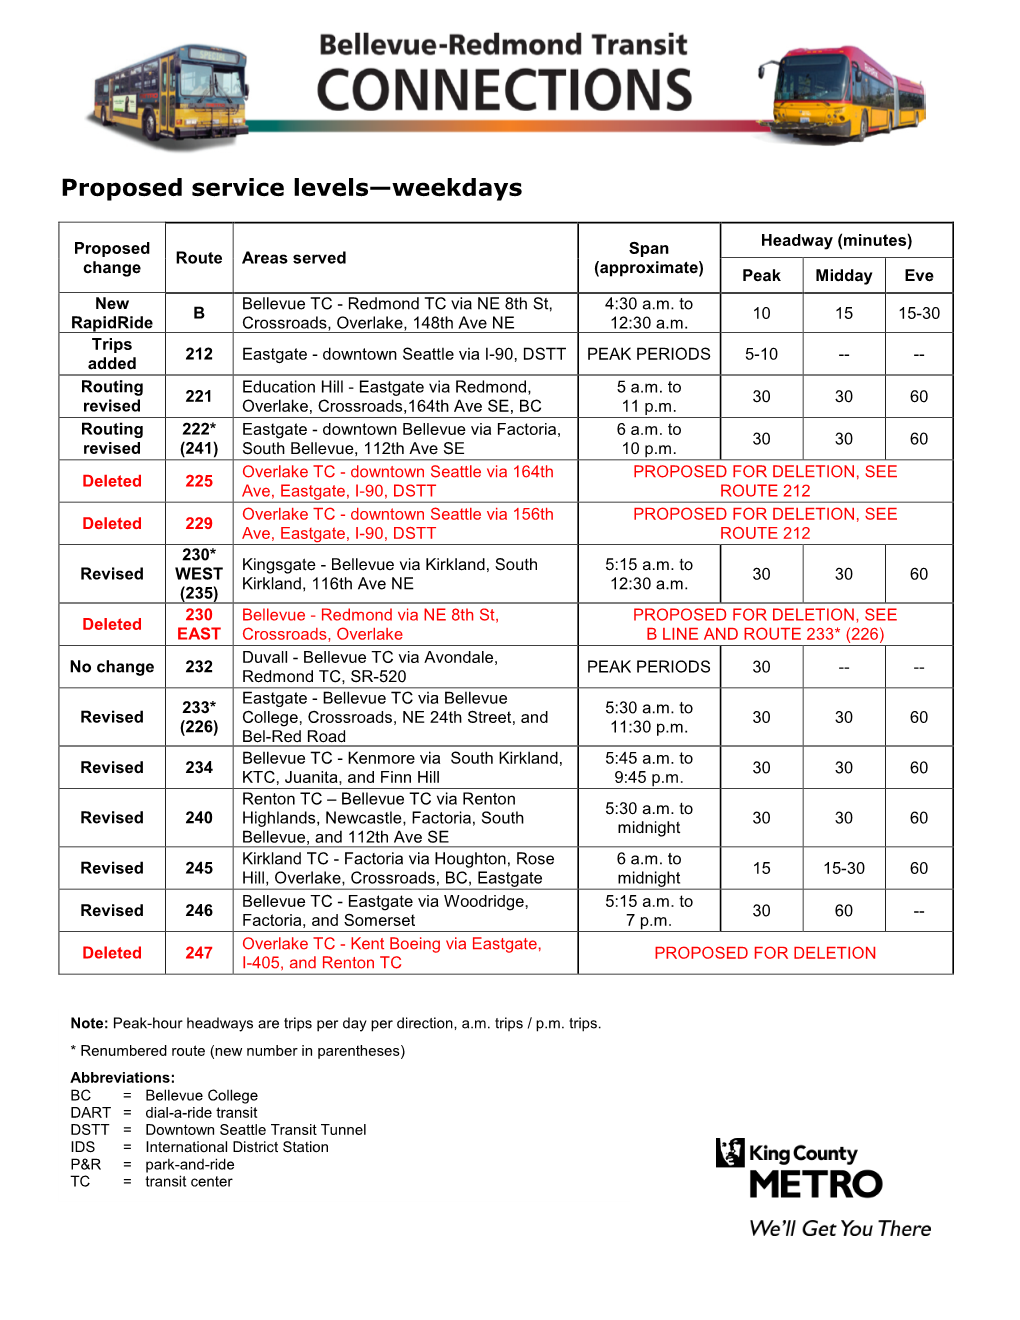 Proposed Service Levels—Weekdays